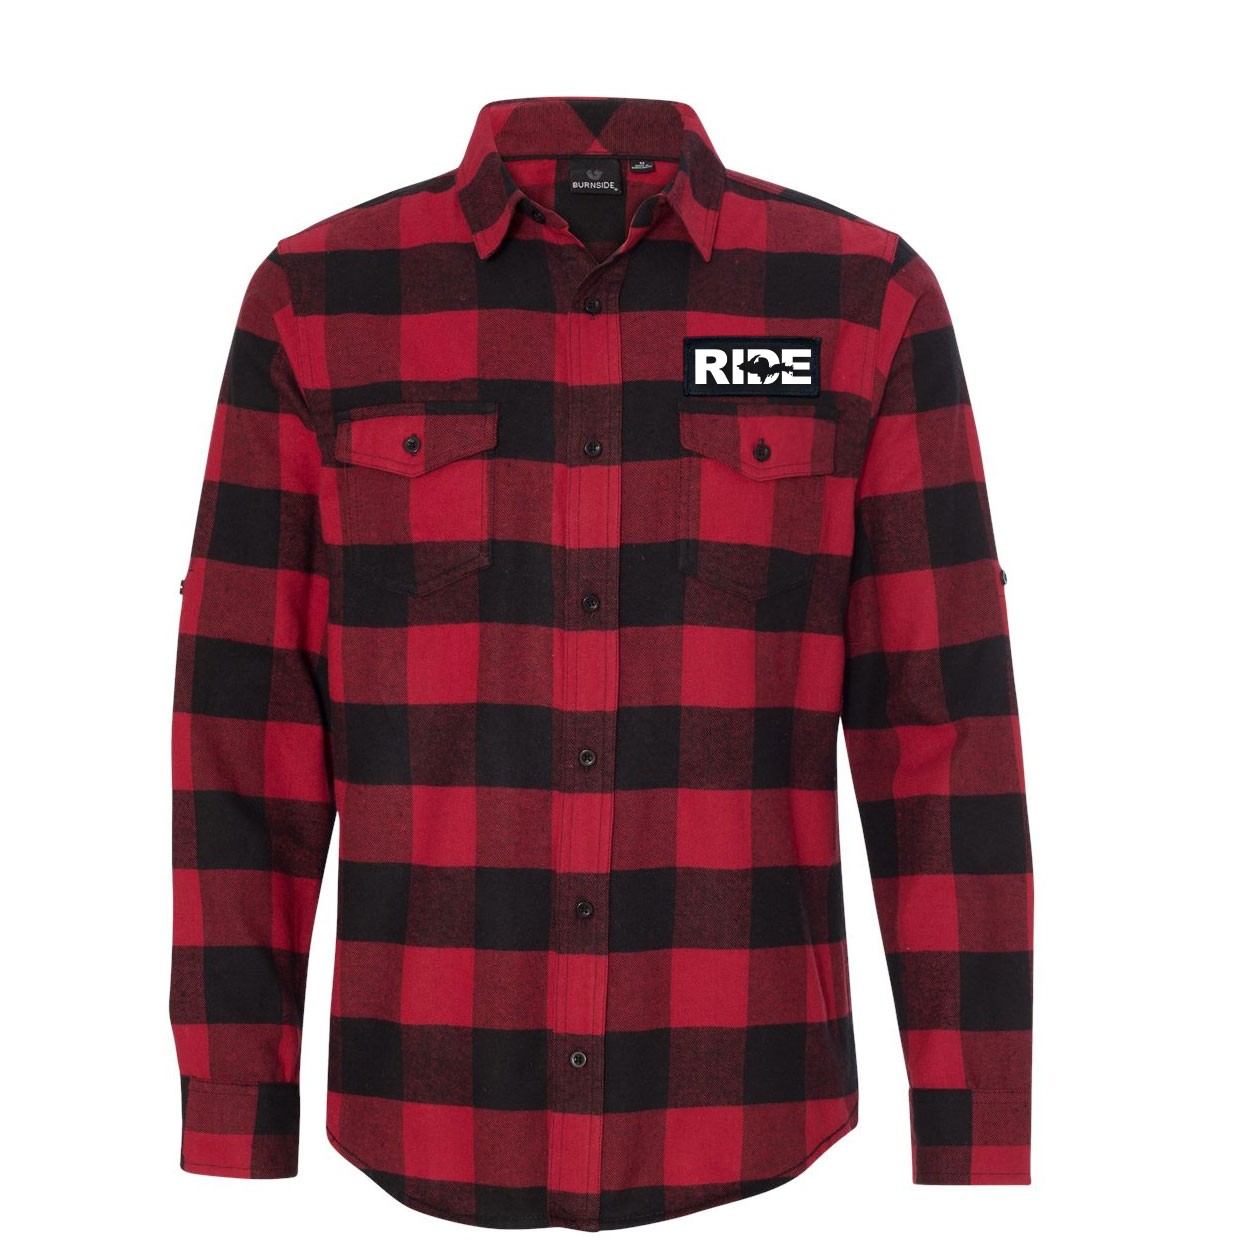 Ride Michigan UP Classic Unisex Long Sleeve Woven Patch Flannel Shirt Red/Black Buffalo (White Logo)